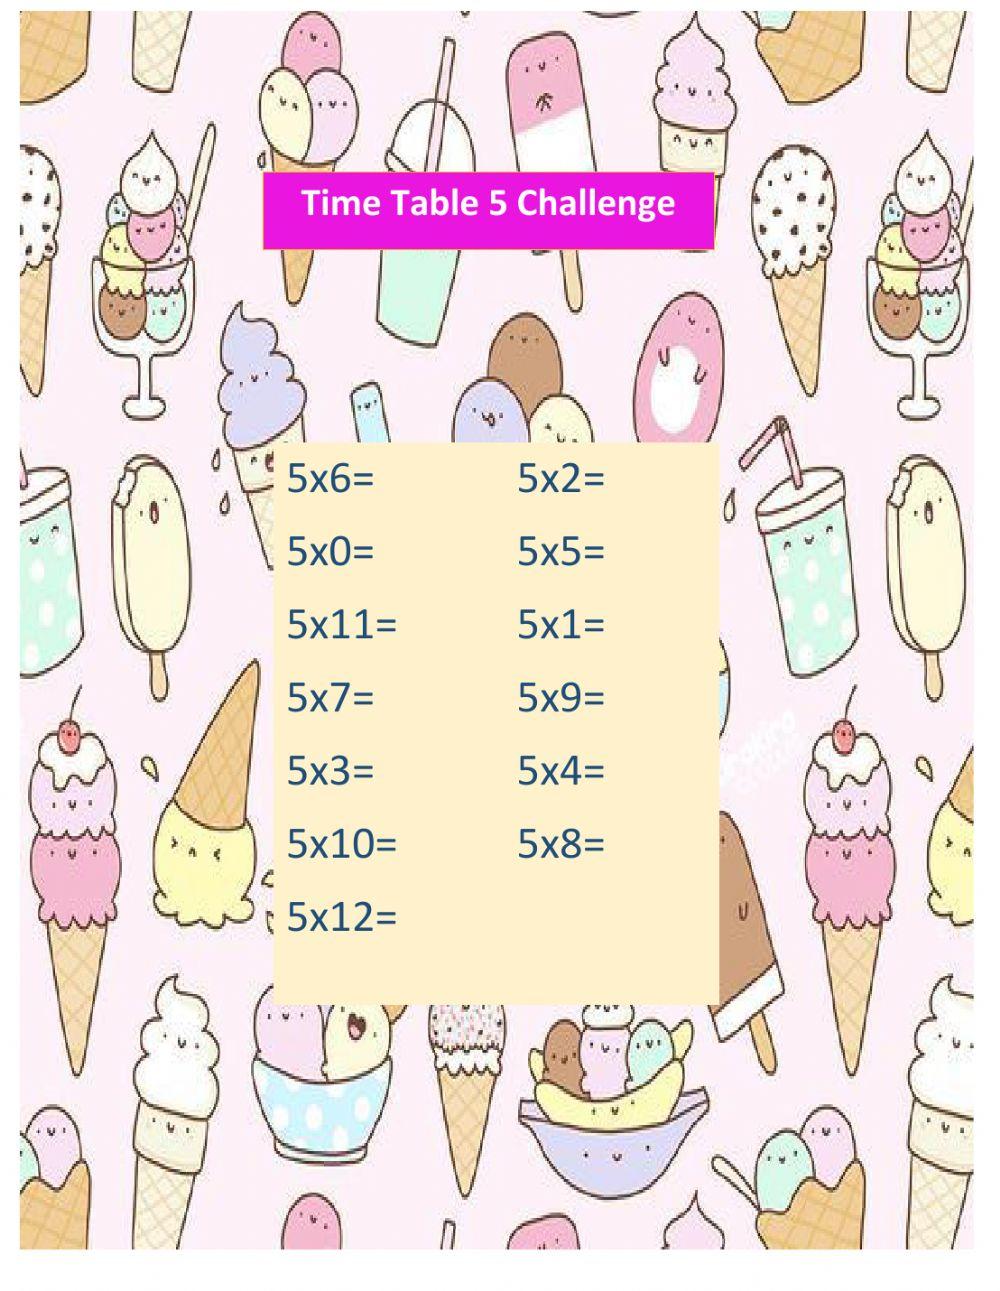 Time Table 5 Challenge